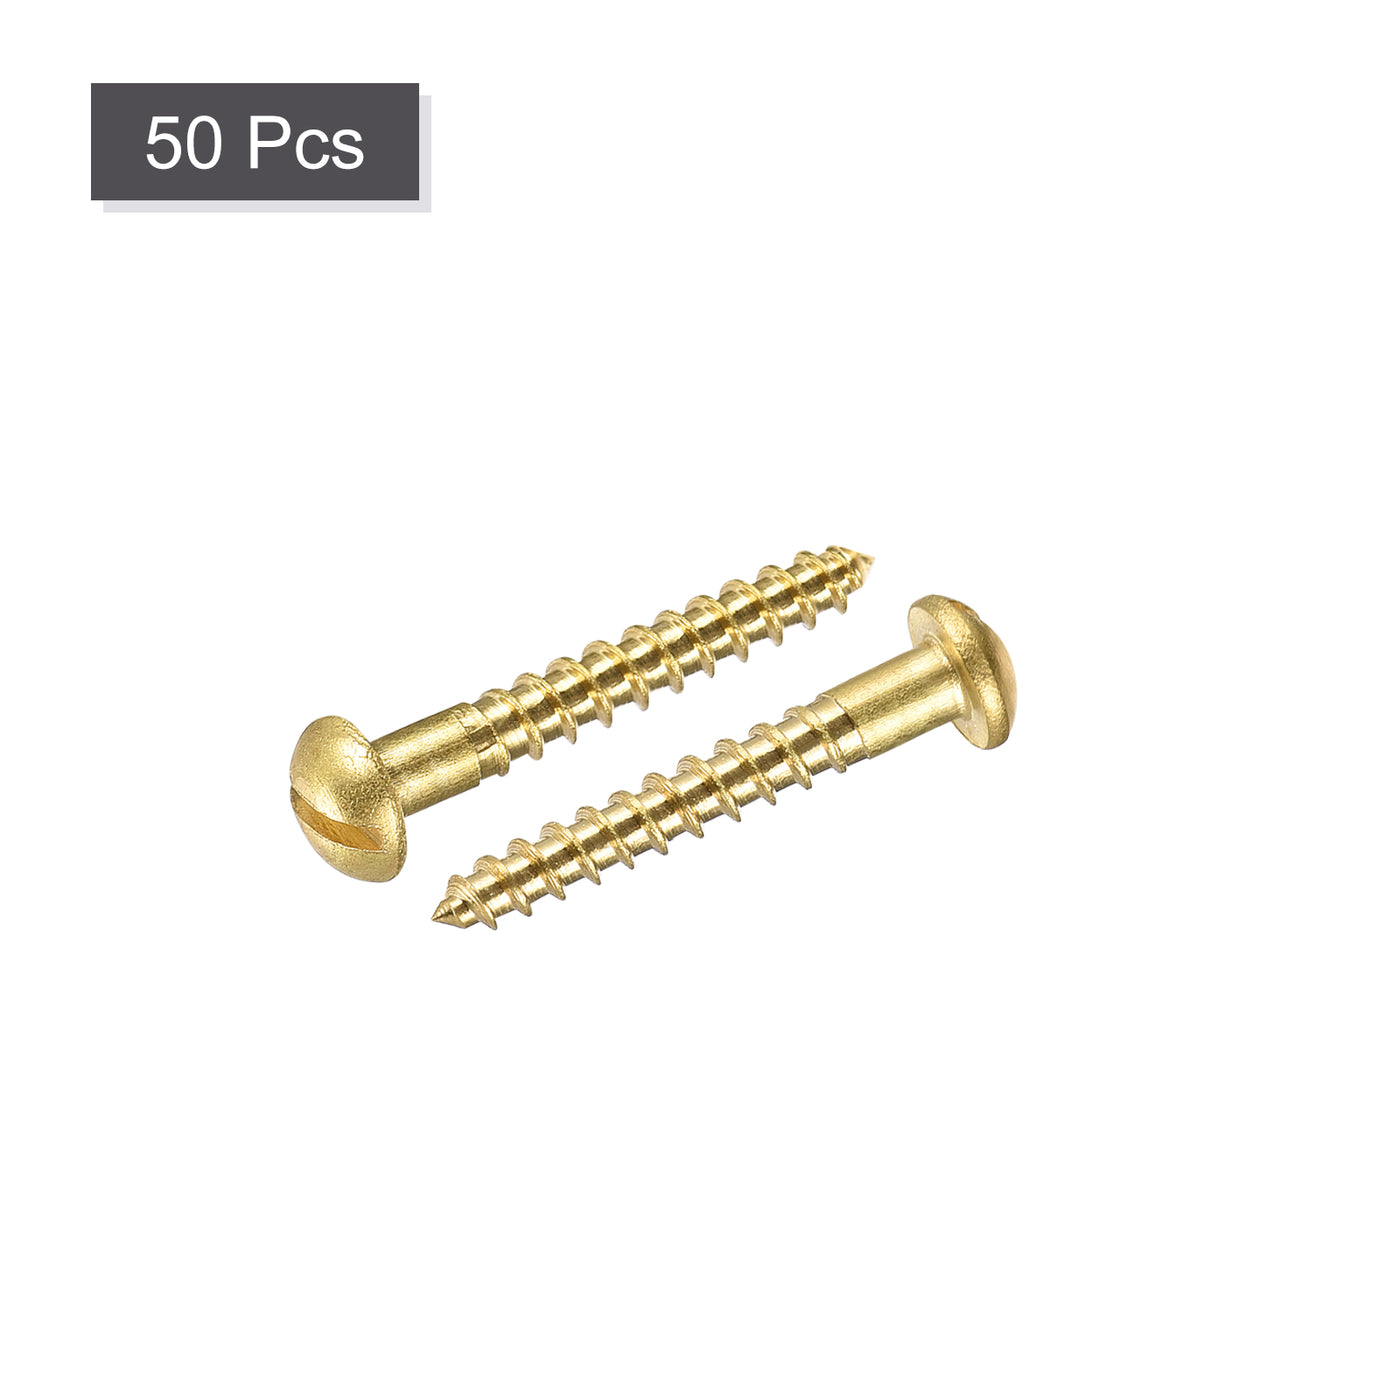 uxcell Uxcell Wood Screws, Slotted Round Head Brass Self-Tapping Screw